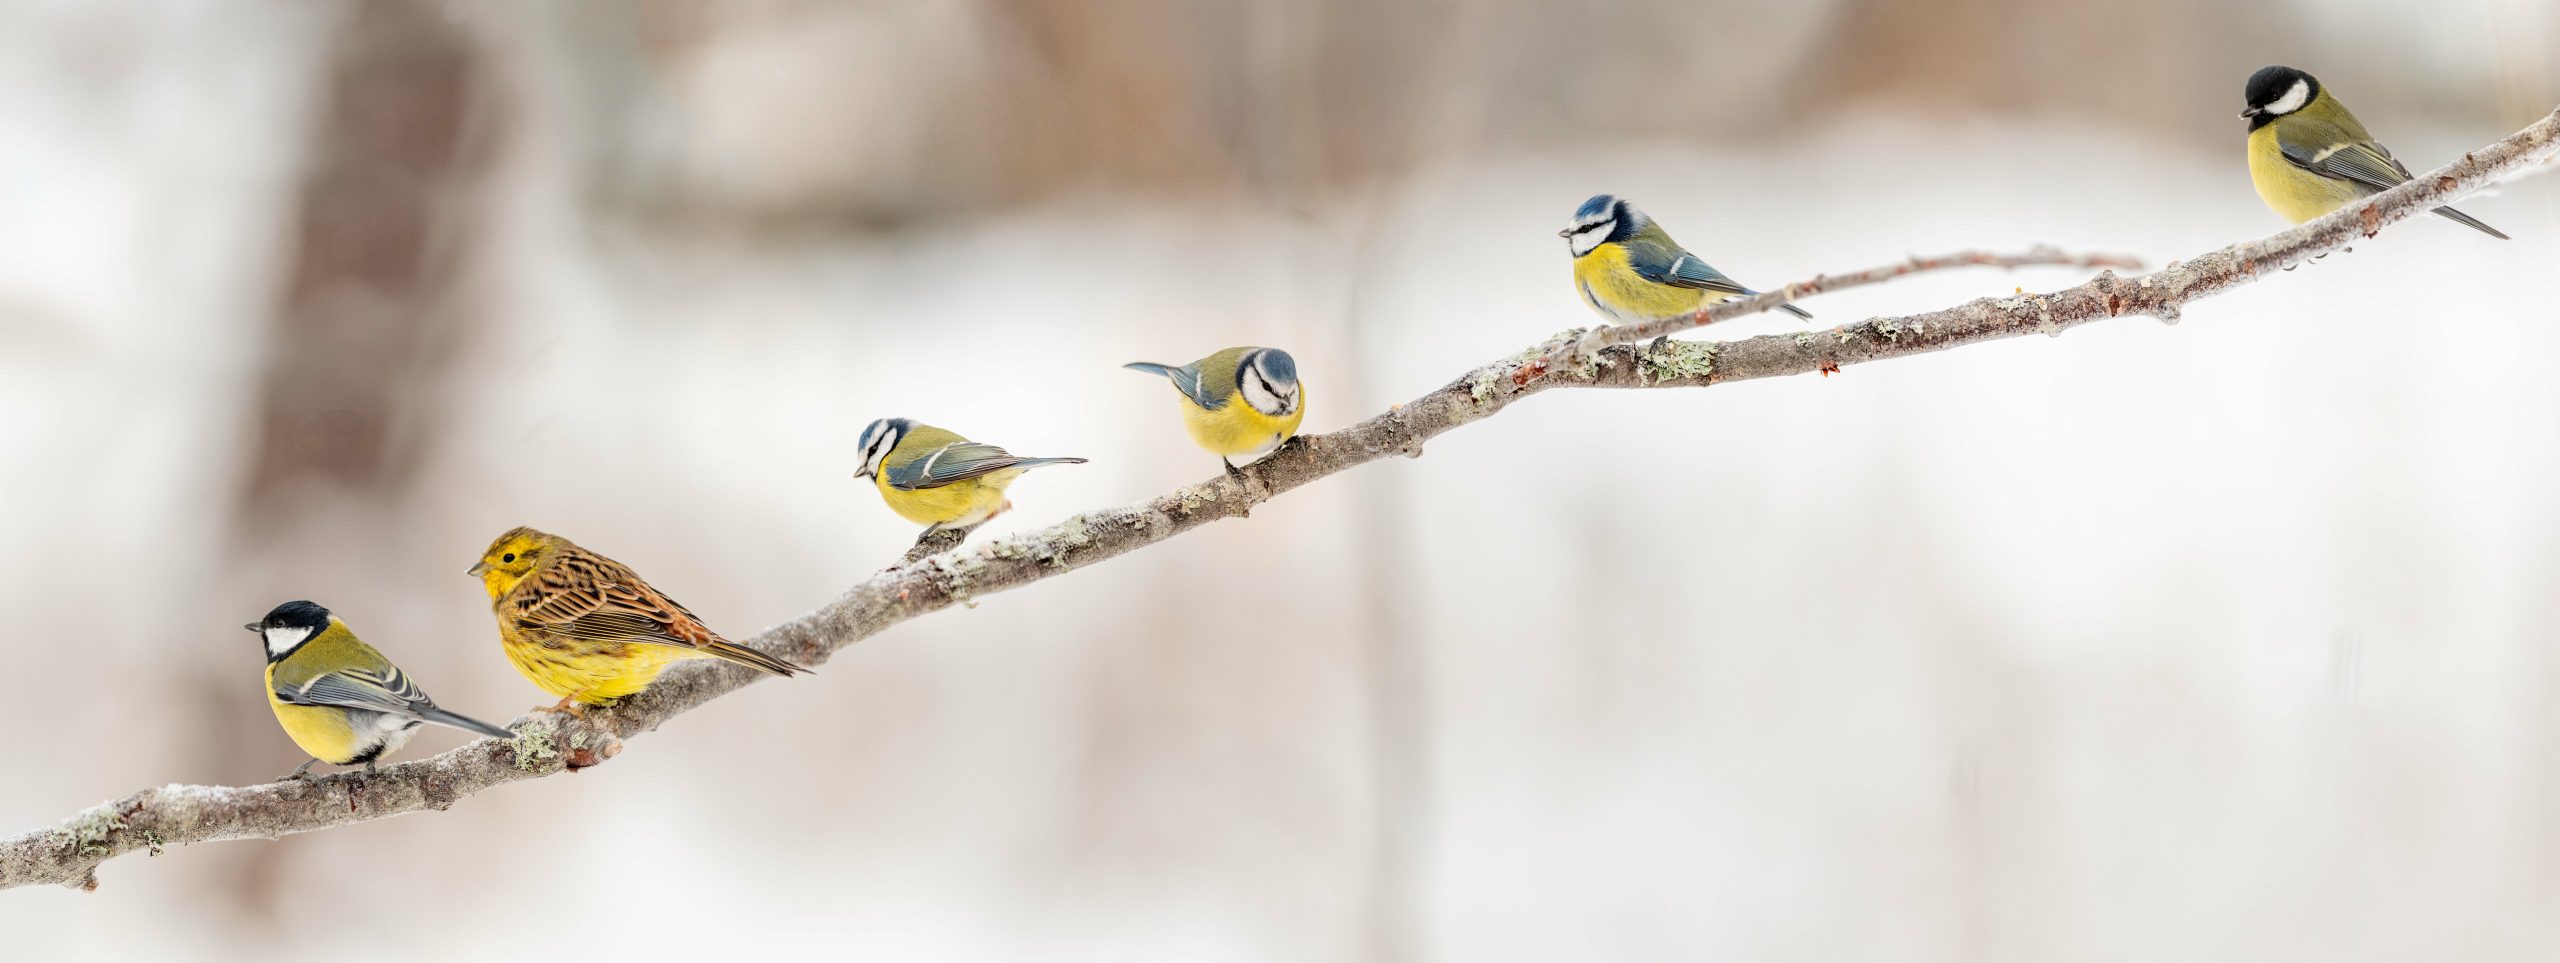 Birds need our help in winter